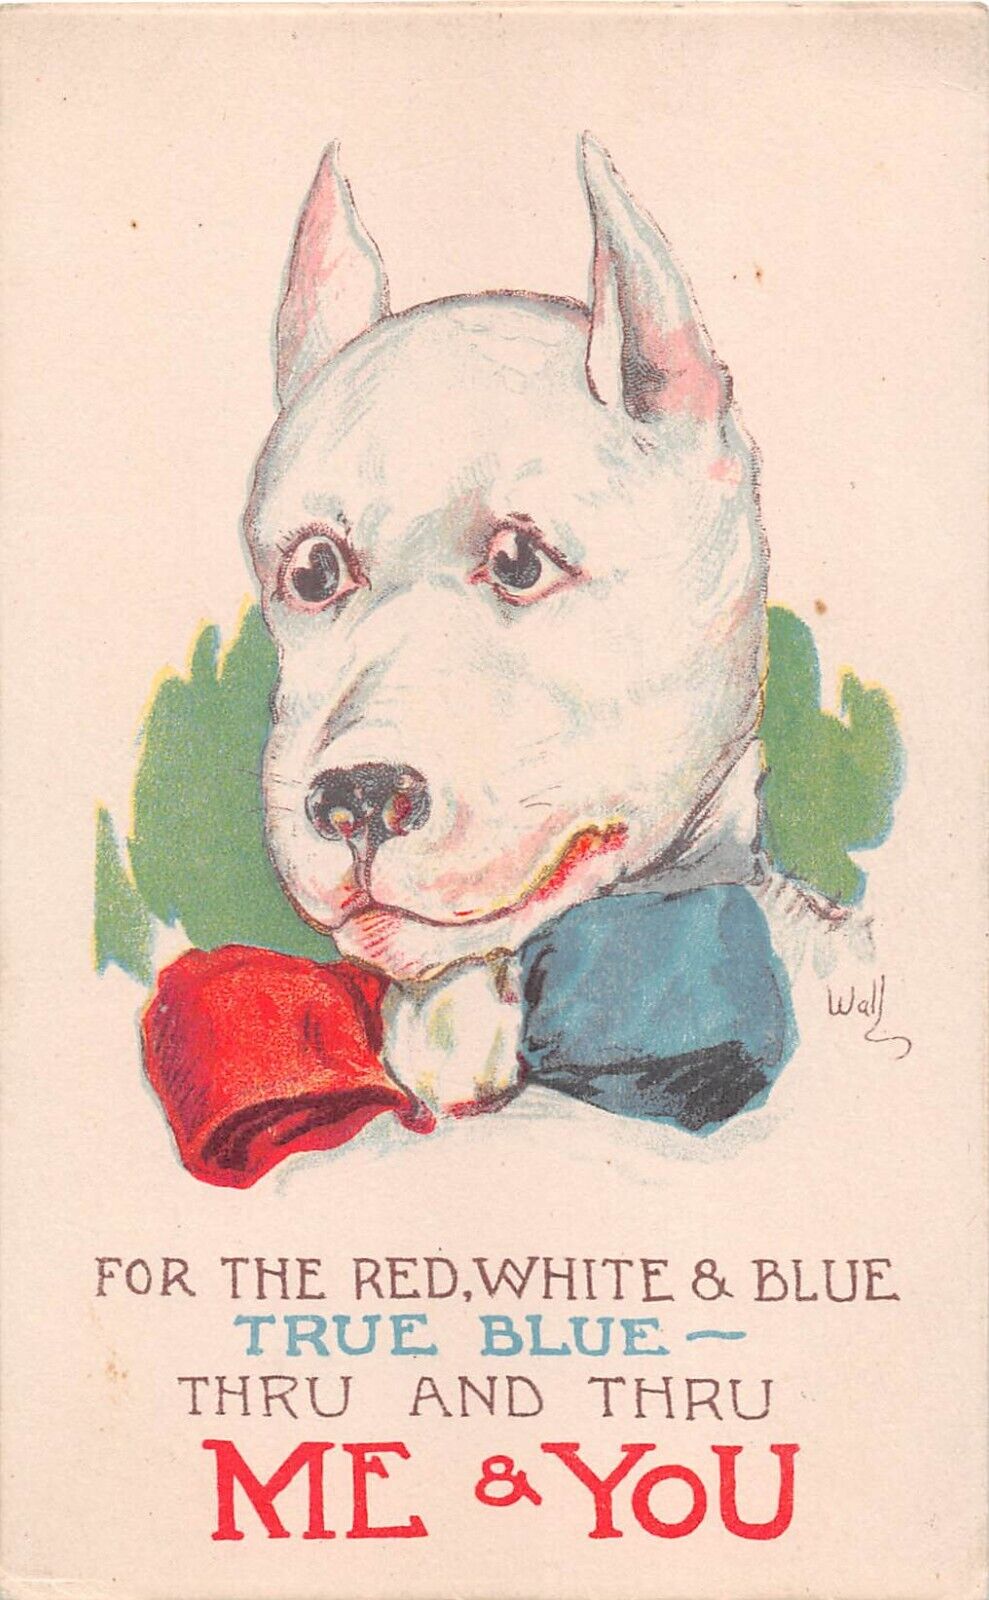 Patriotic Old PC-American Bulldog or Pit Bull Terrier by Wall-Red, White, & Blue